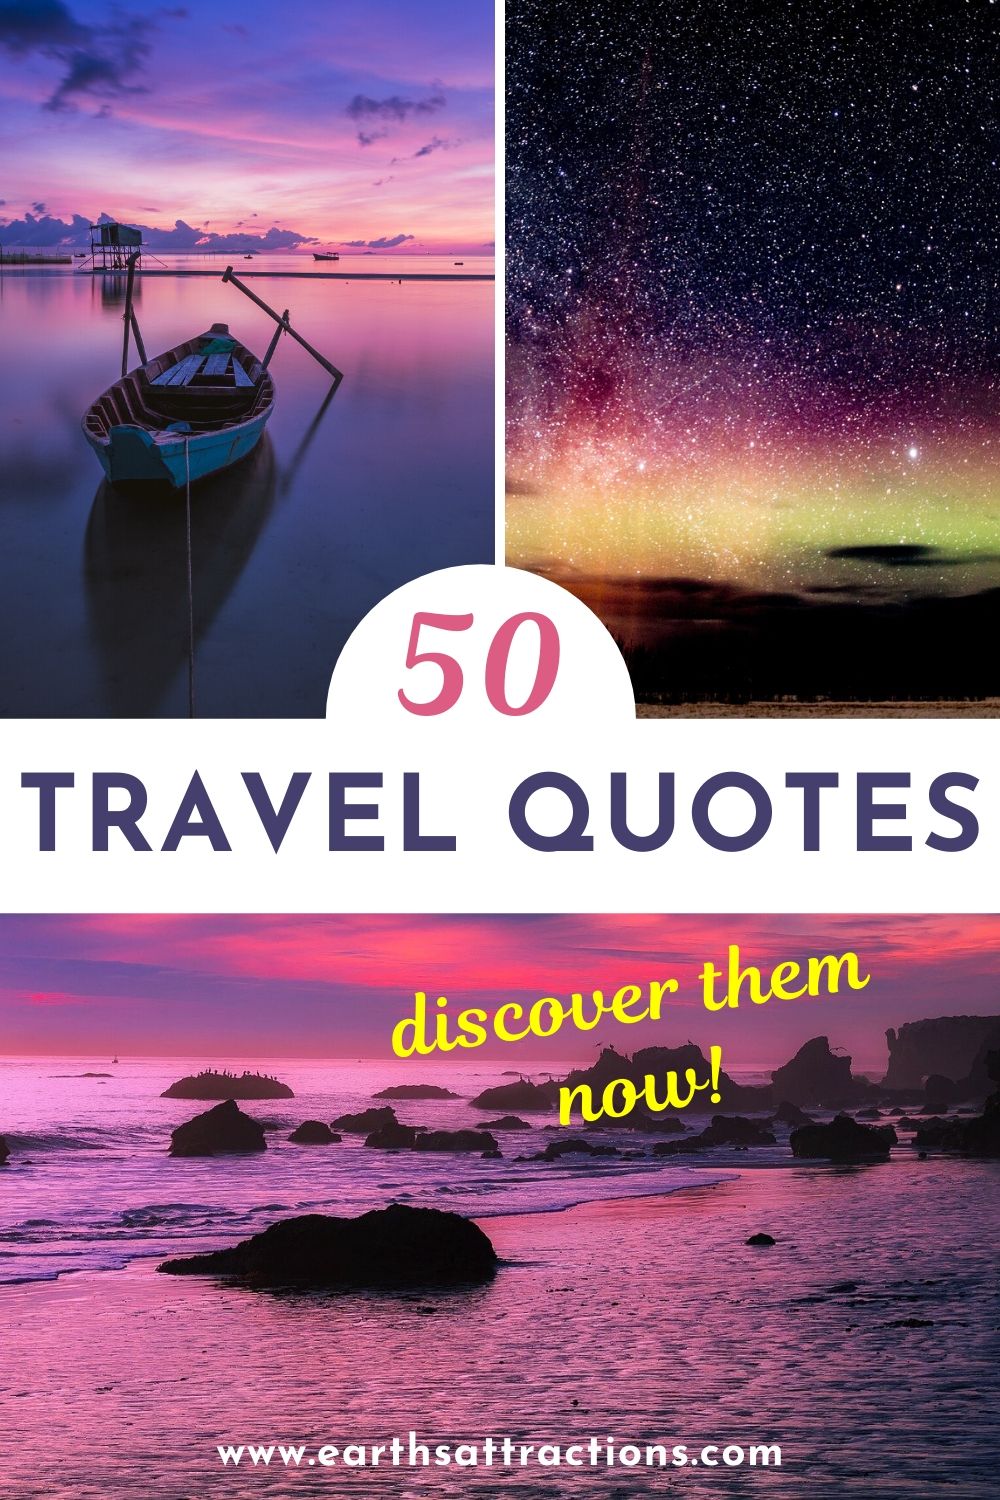 The best travel quotes! Discover 50 inspirational travel quotes, motivational travel quotes, and more! These are the best travel quotes to inspire you to travel. Short travel quotes, as well as long travel quotes and quotes by famous people, are included! Read the article now#travelquotes #quotes #travel #travelquote #earthsattractions #wanderlust #traveling